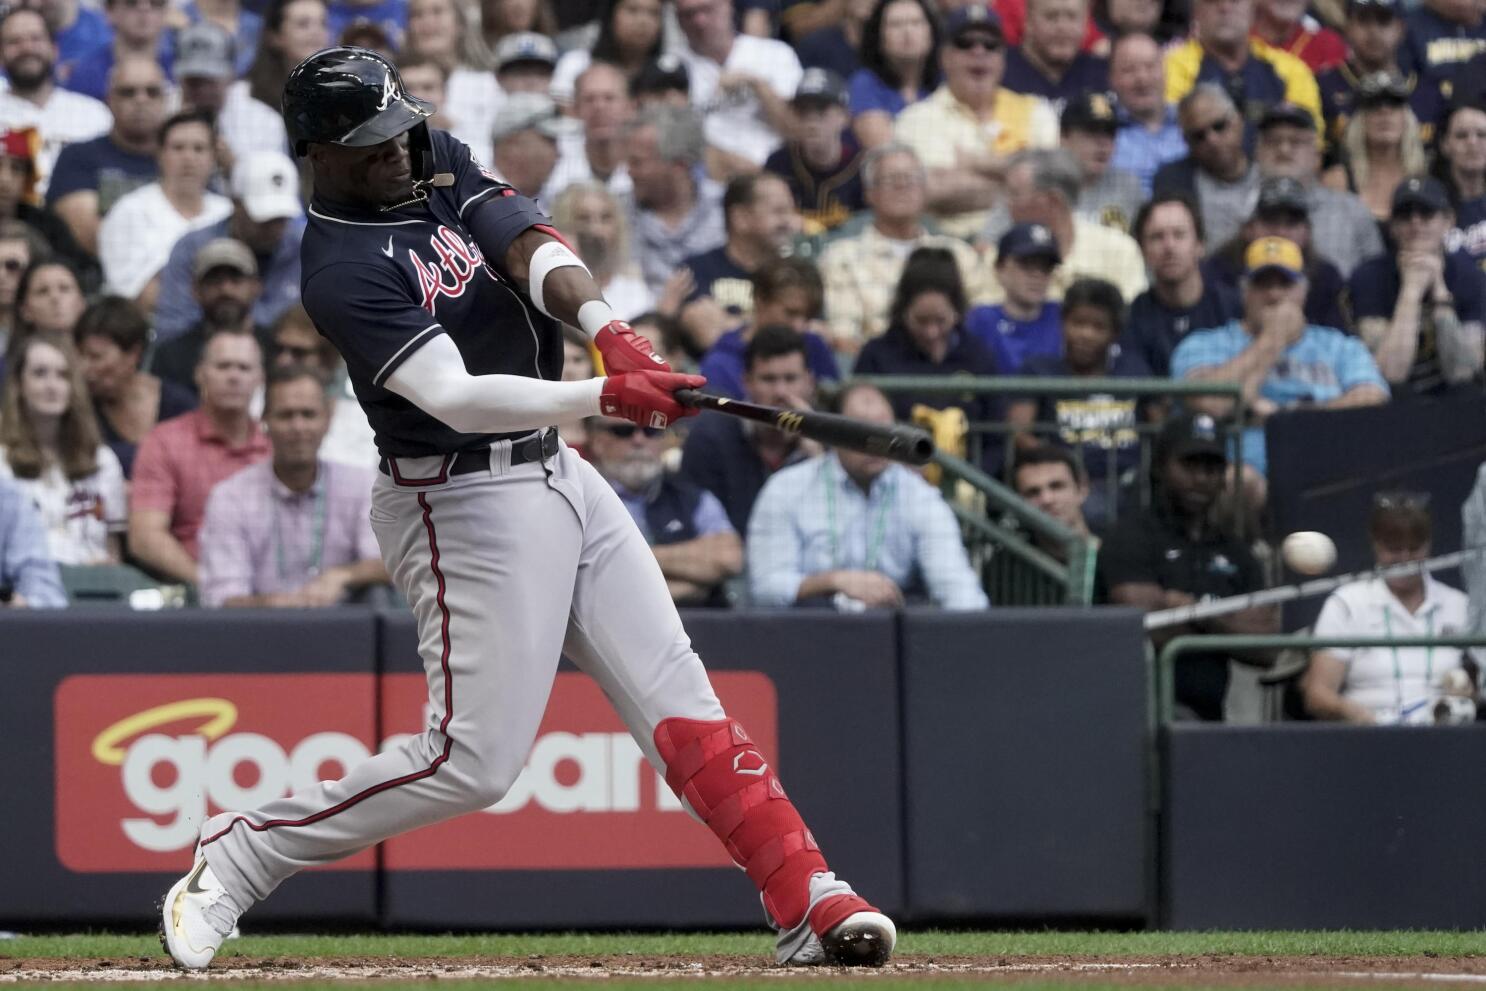 Jorge Soler returns to the leadoff spot for Braves in Game 5 - Battery Power